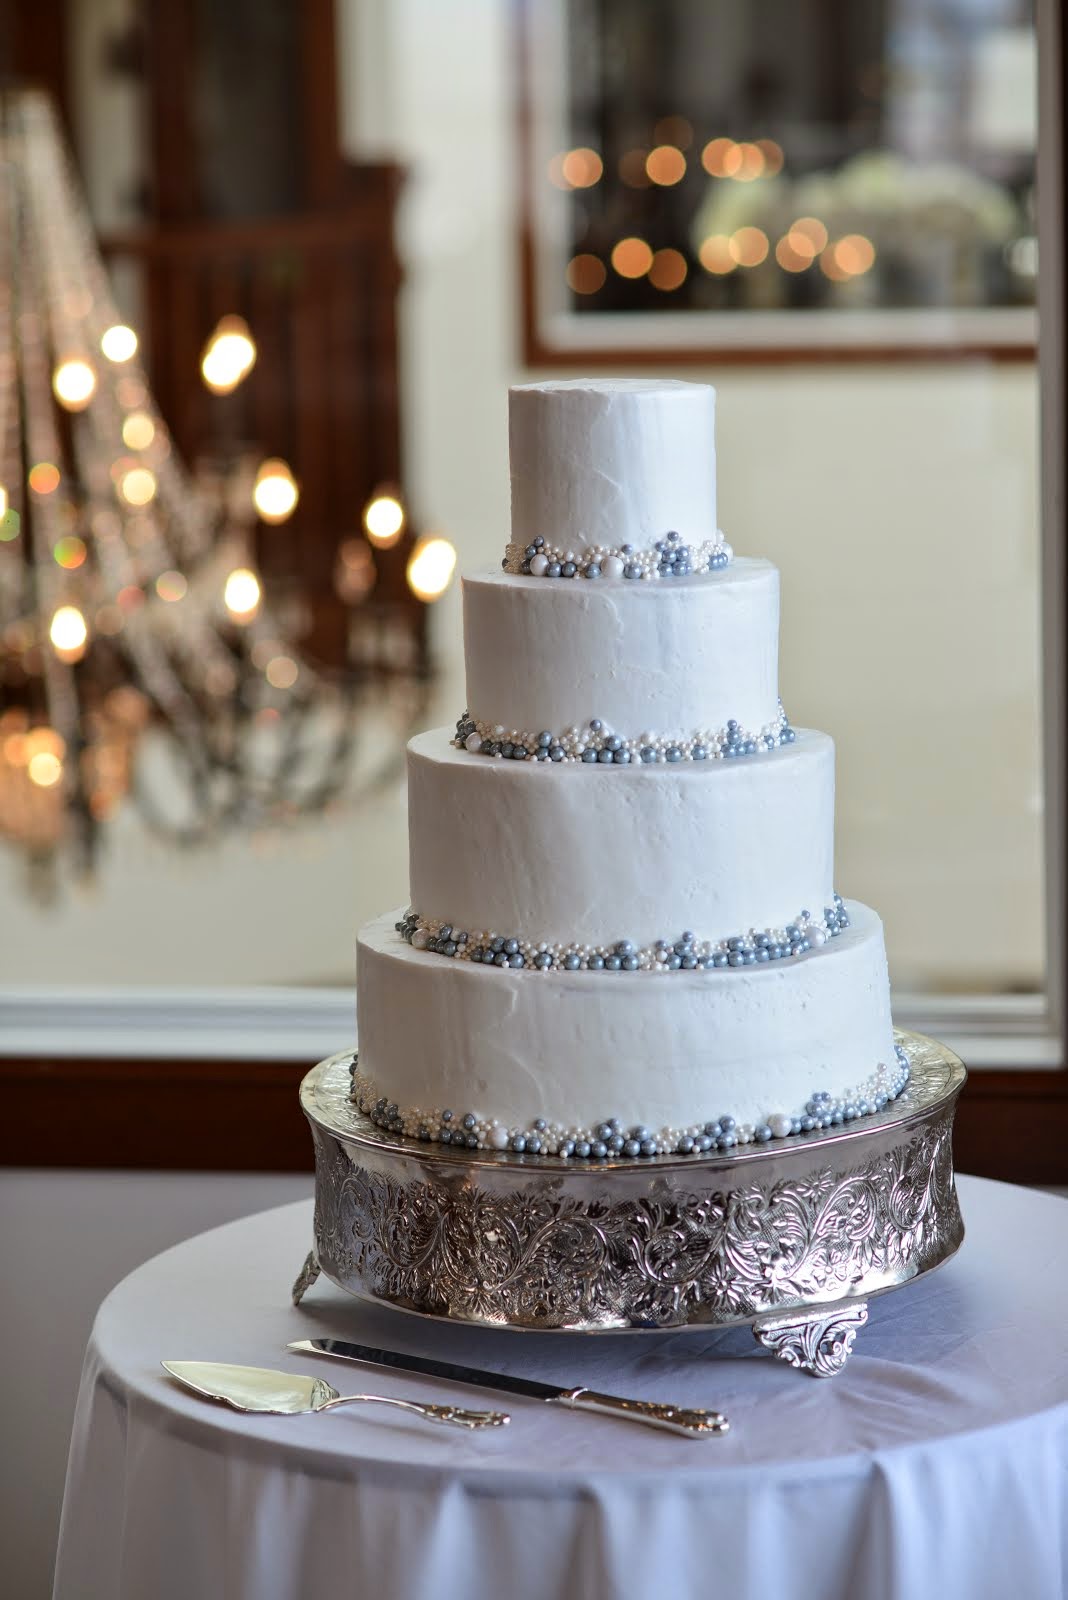 4-tier round buttercream with edible pearls